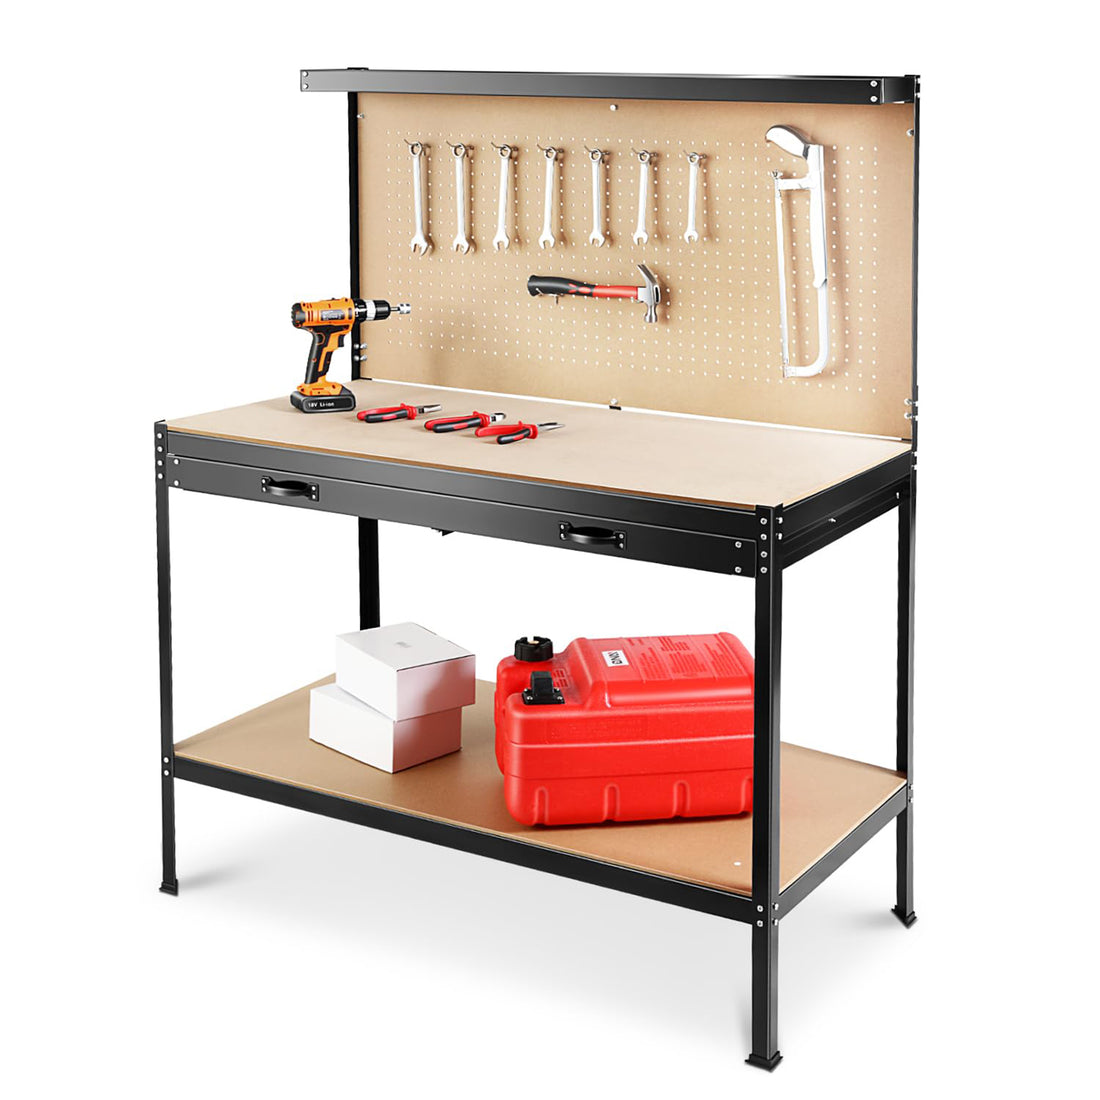 63" Tools Cabinet Working Tables Workbench Tool